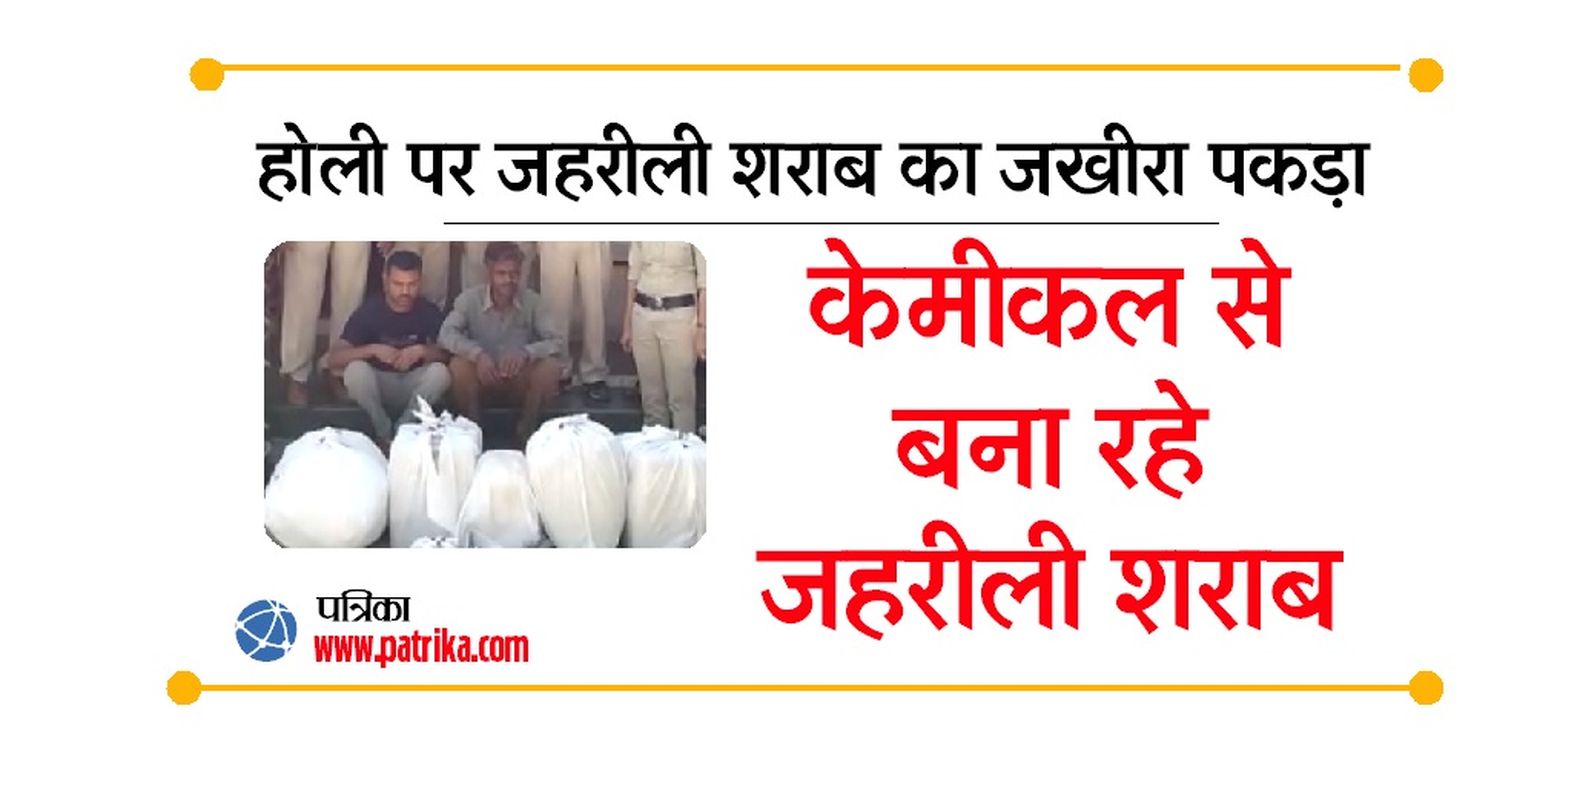 Making liquor by Chemical, 2 Arrested in Ajaigarh Panna district